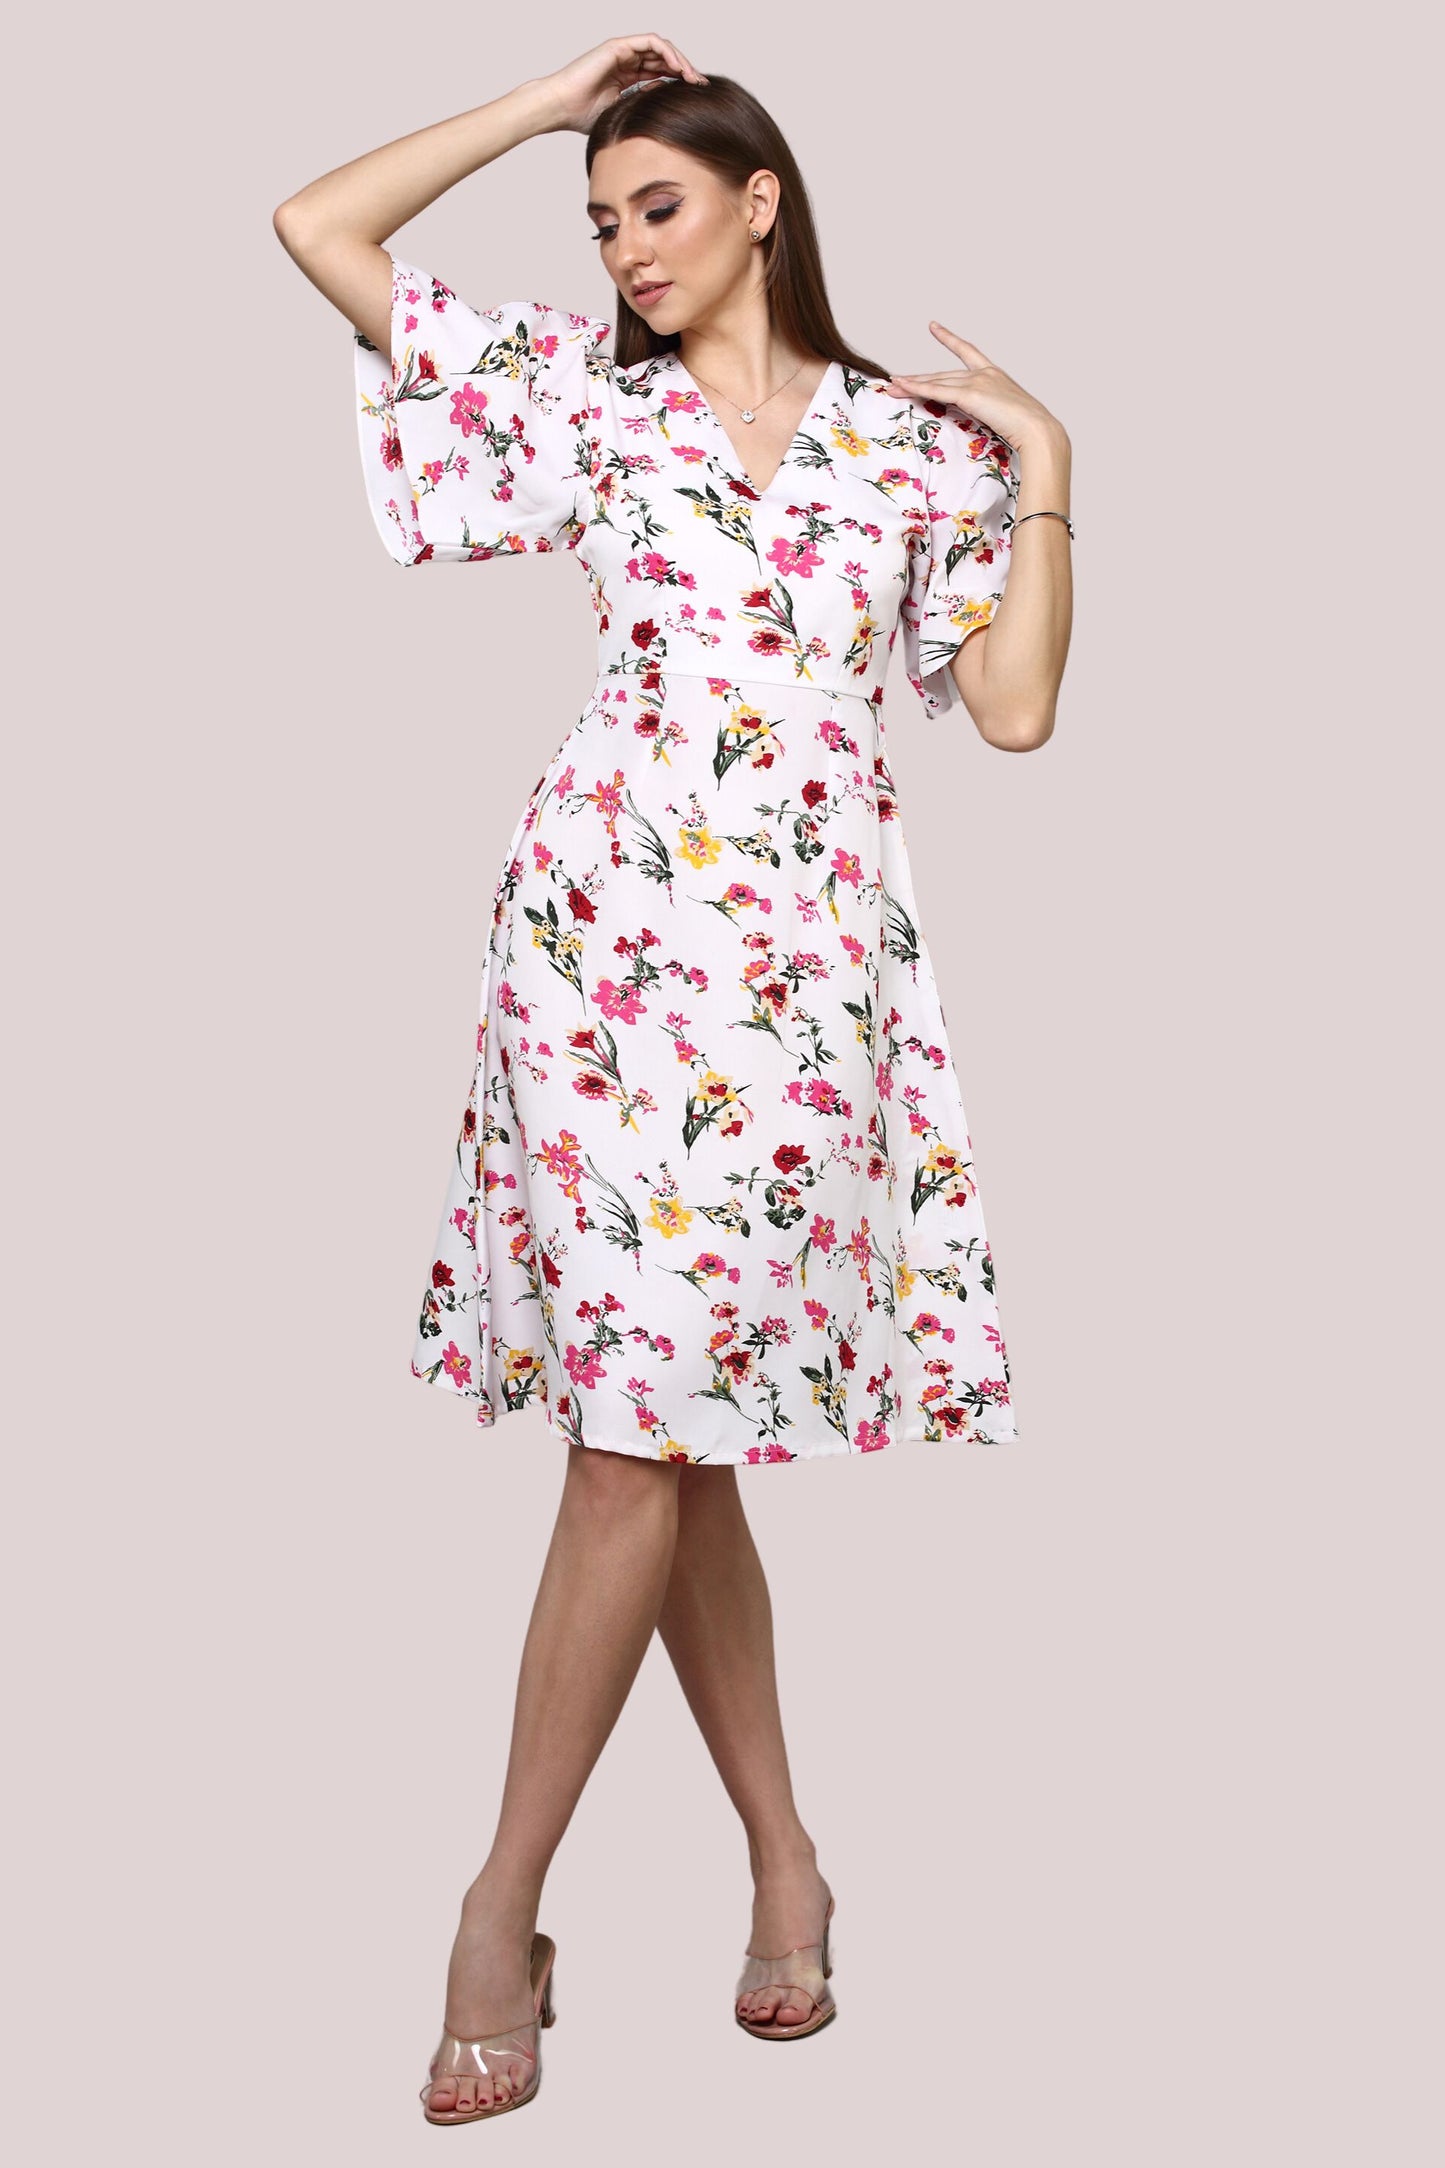 White Floral printed dress with flared sleeve